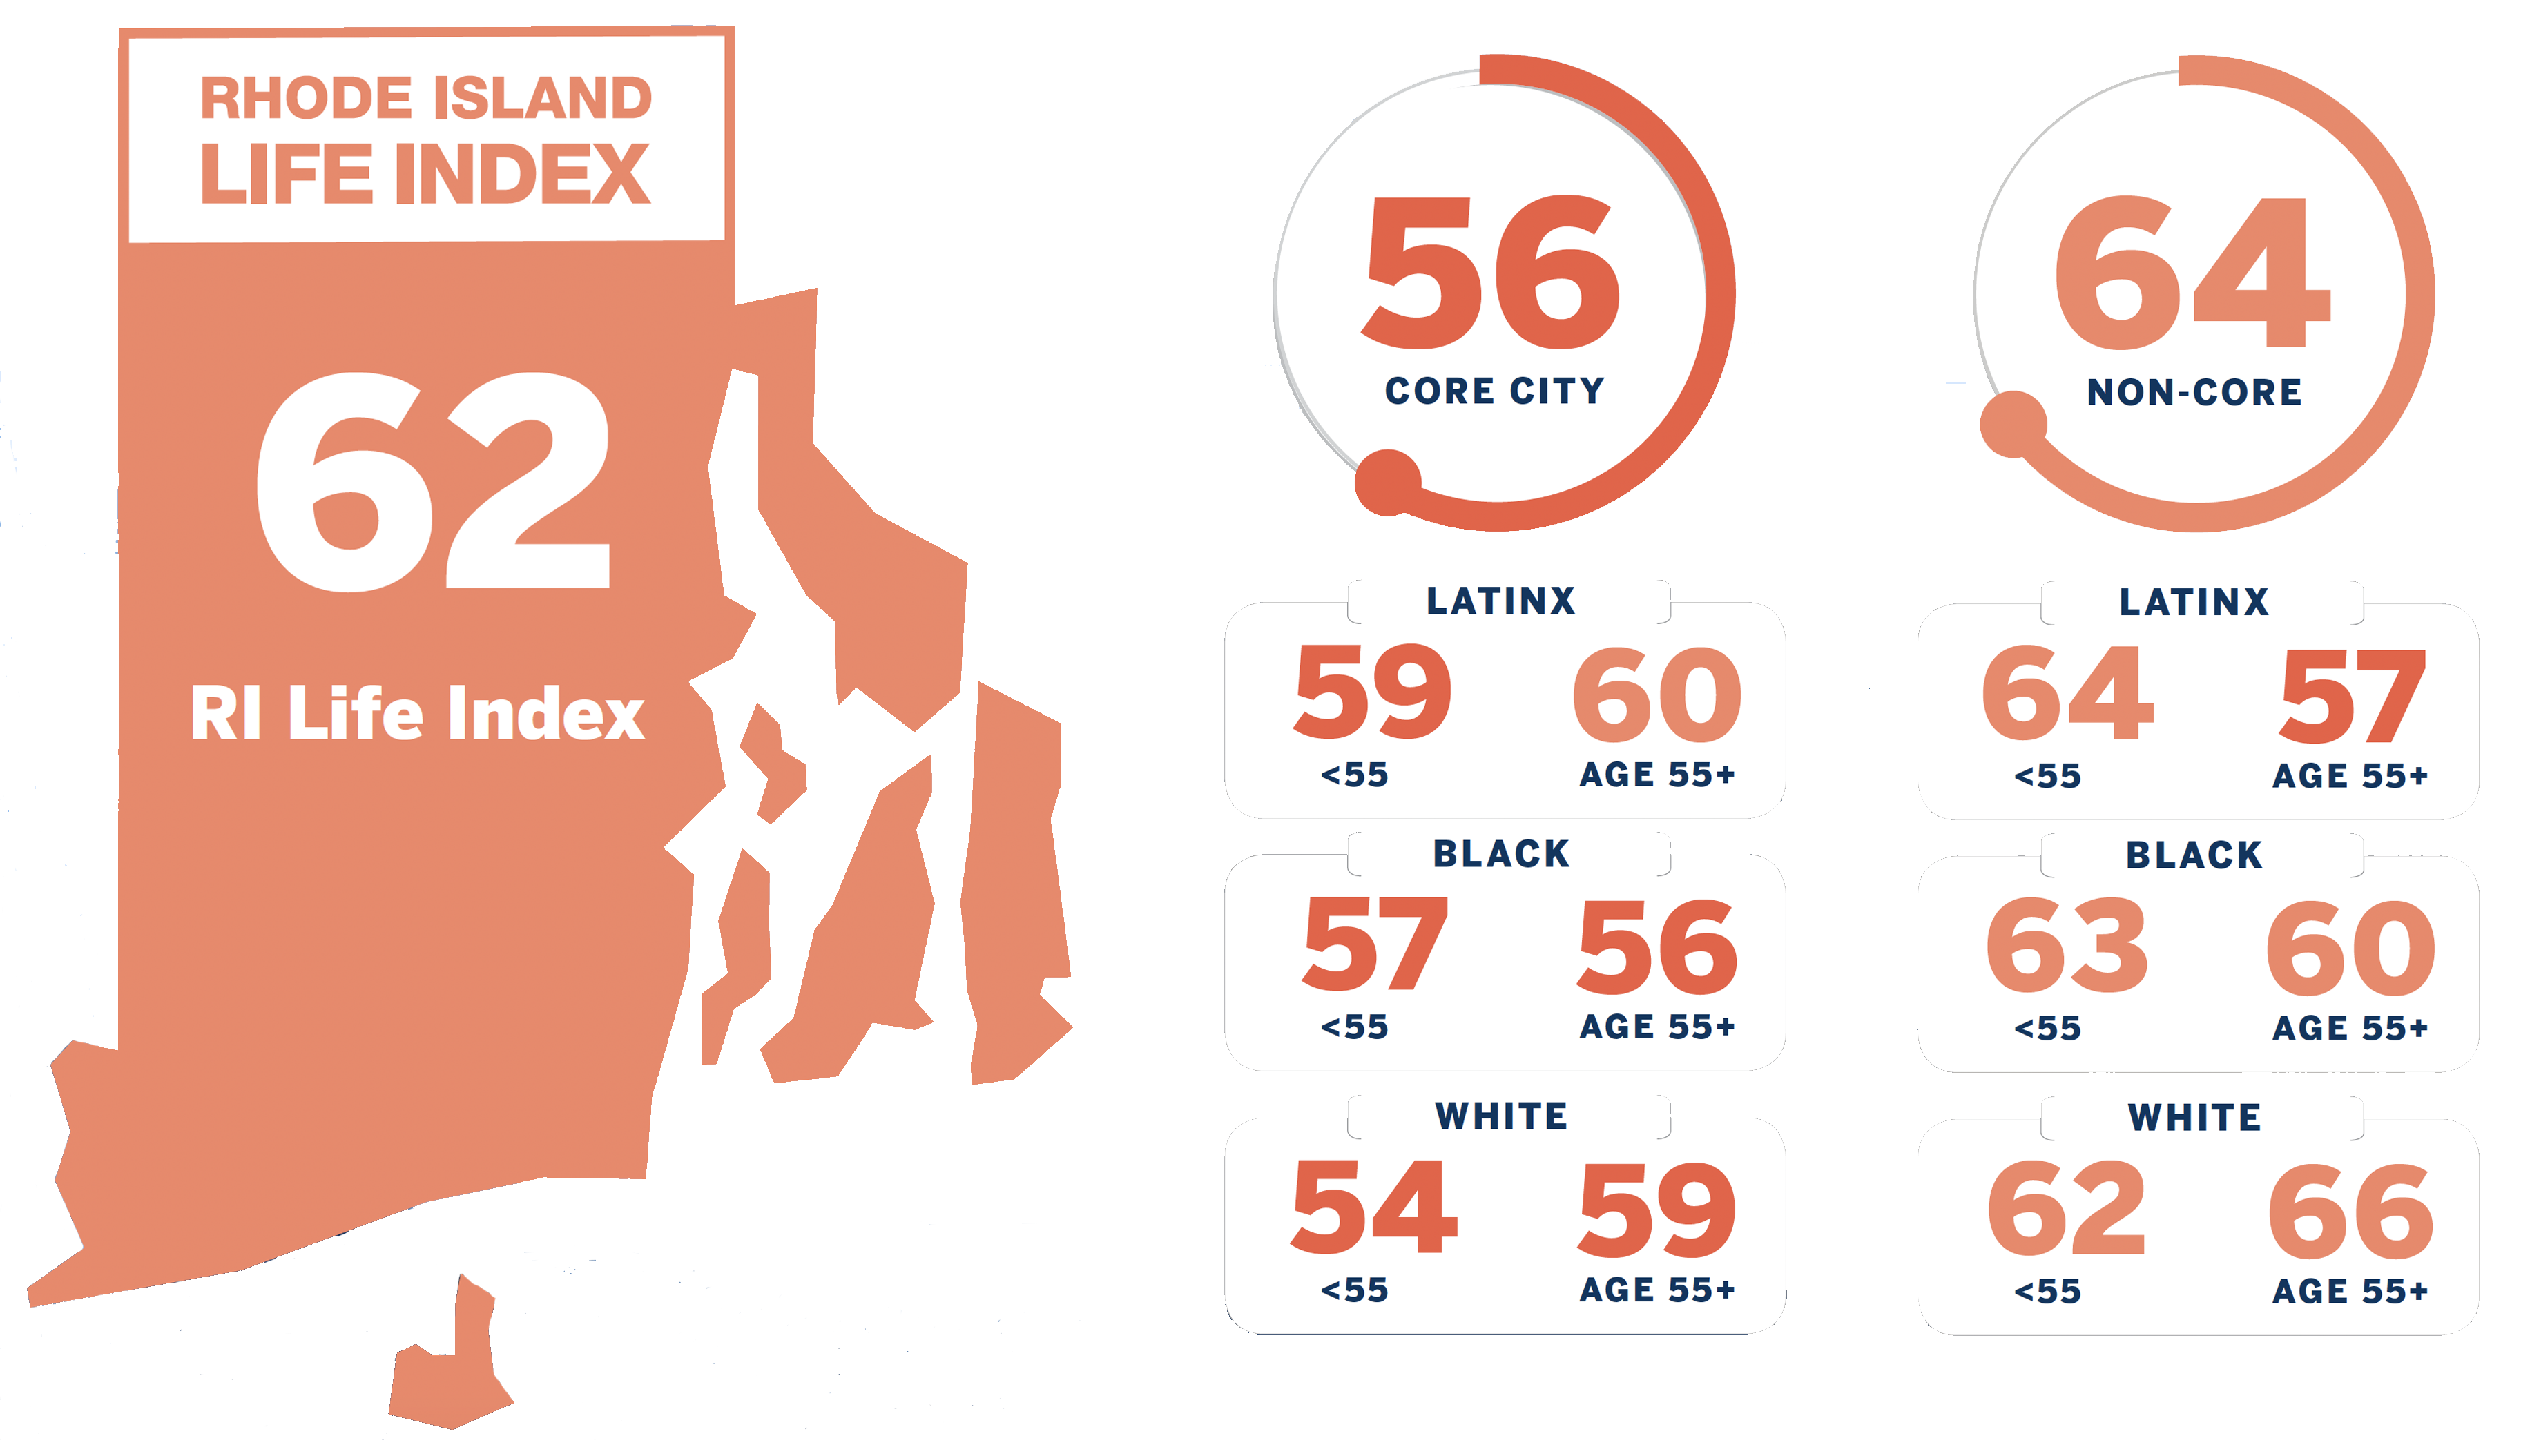 RI Life Index: 62; Chart breakdown: Core City: 56 (broken down by Latinx, Black, and White ages less than and over 55) Non-Core: 64 (broken down by Latinx, Black, and White ages less than and over 55)